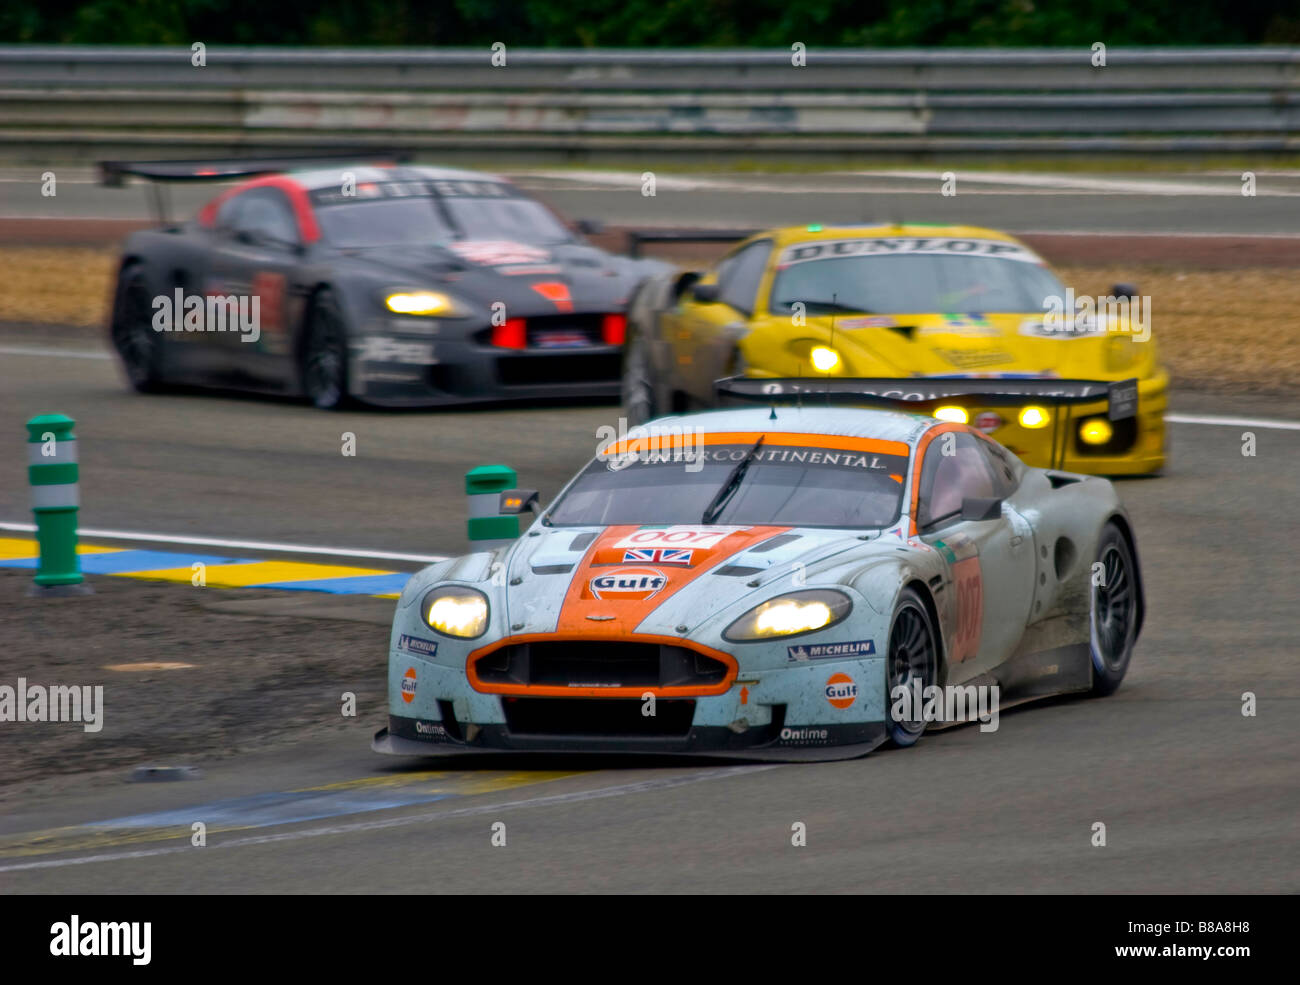 Two Aston Martin DBR9's and a Ferrari 430 GT2 racing in the 2008 Le Mans 24-Hour race, France. Stock Photo